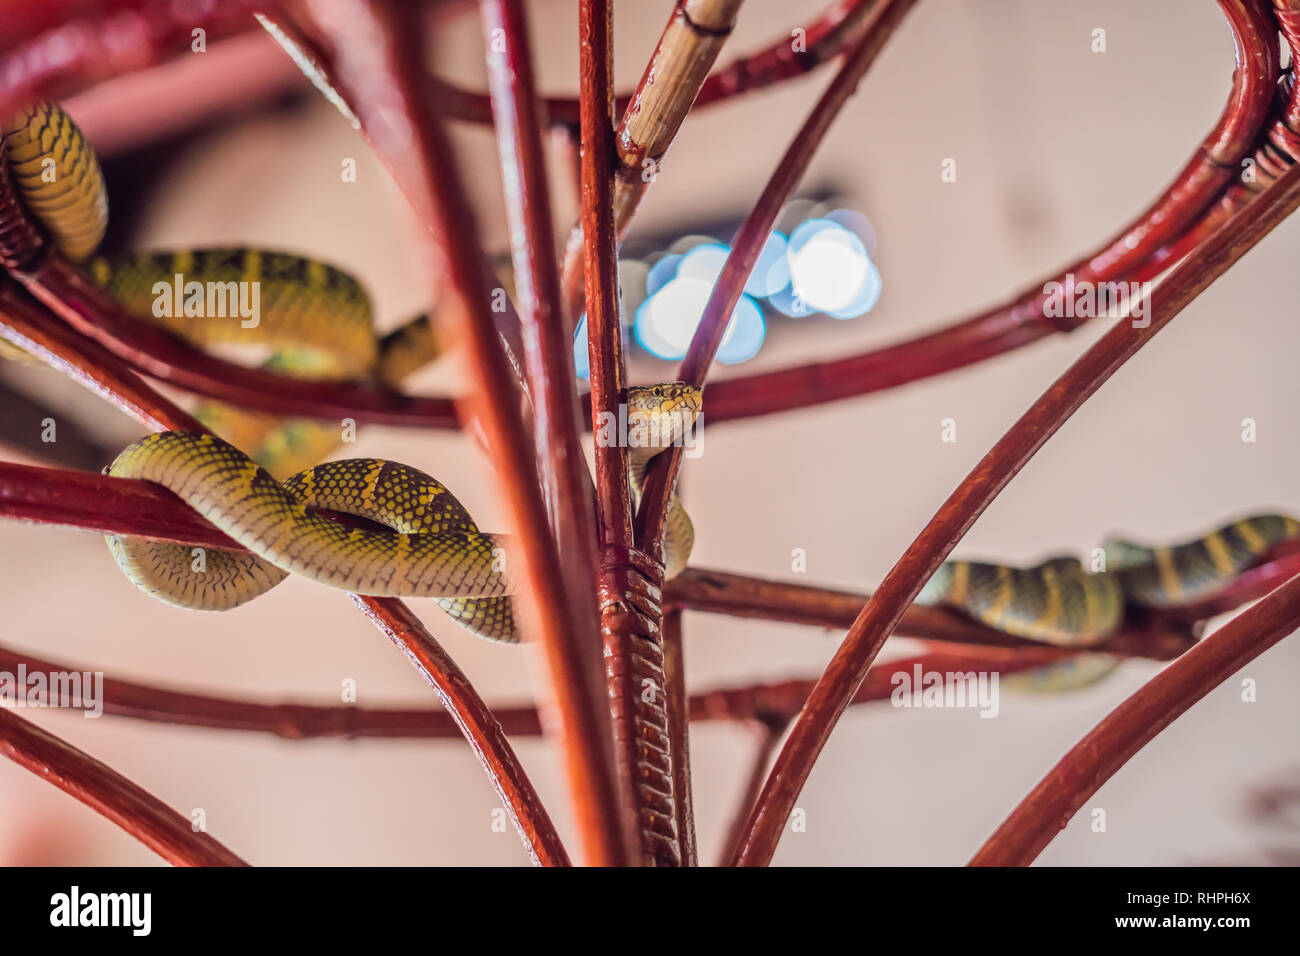 Snake on branch in Snake Temple at Penang, Malaysia Stock Photo